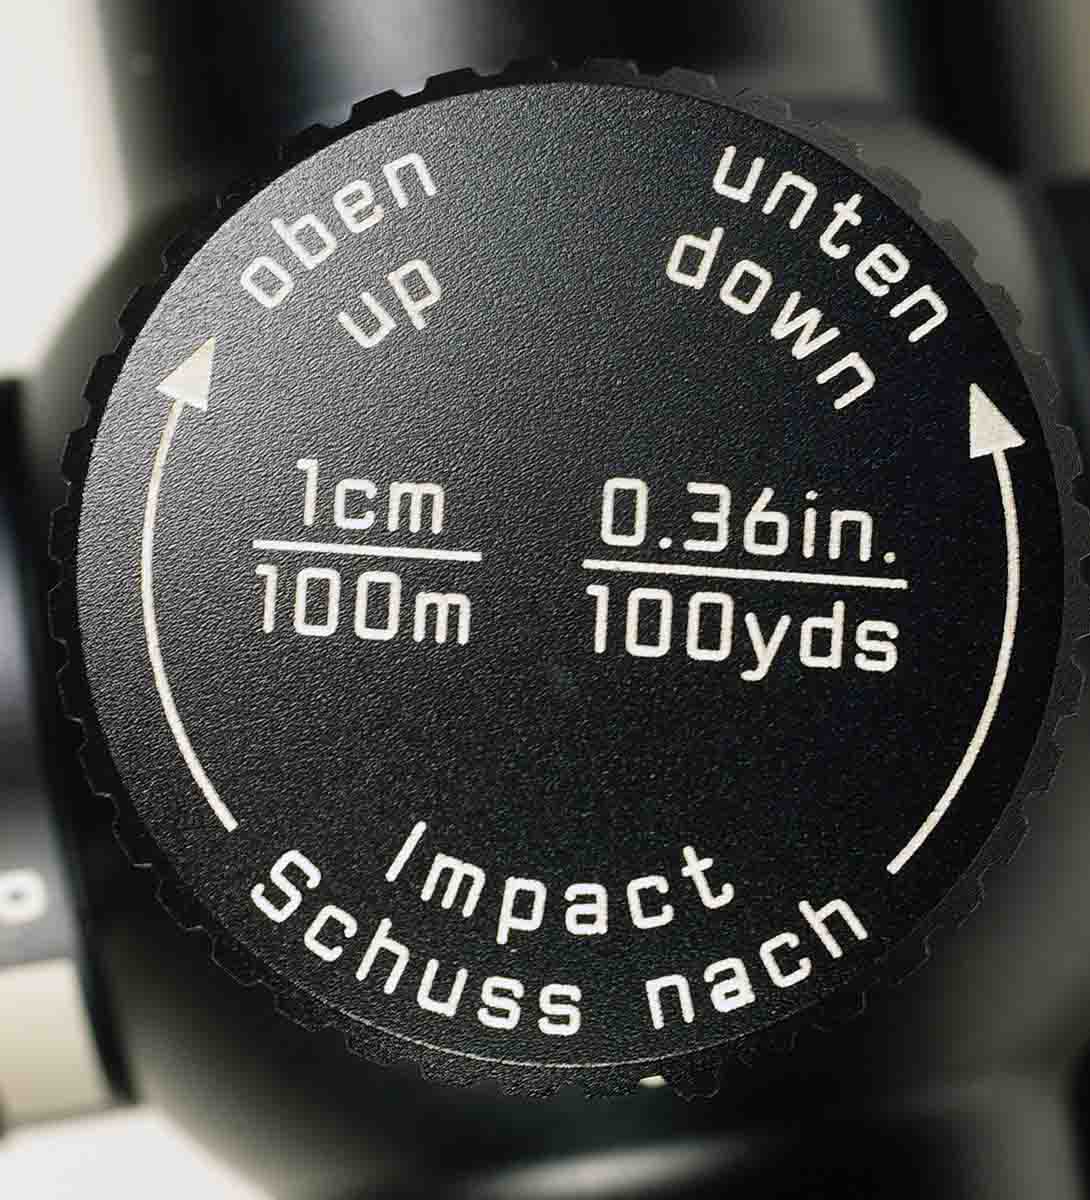 The elevation dial on the Magnus scope features one-centimeter click adjustments. The Rangemaster 2800.COM can be set to provide the number of clicks required to compensate for bullet drop.